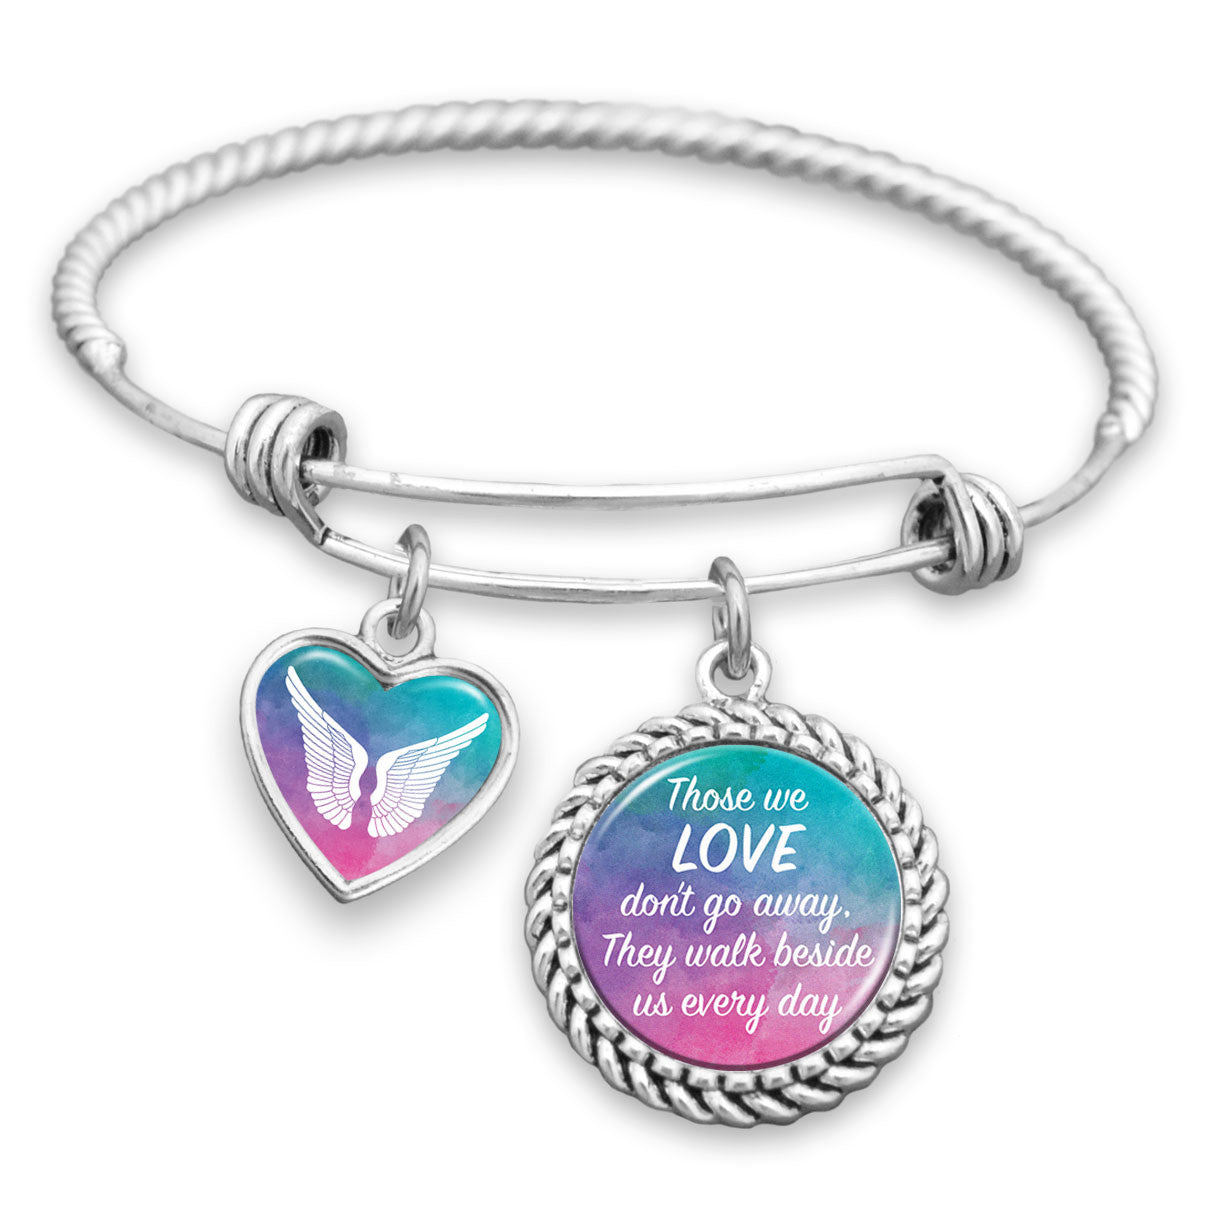 Those We Love Don't Go Away, They Walk Beside Us Every Day Charm Bracelet